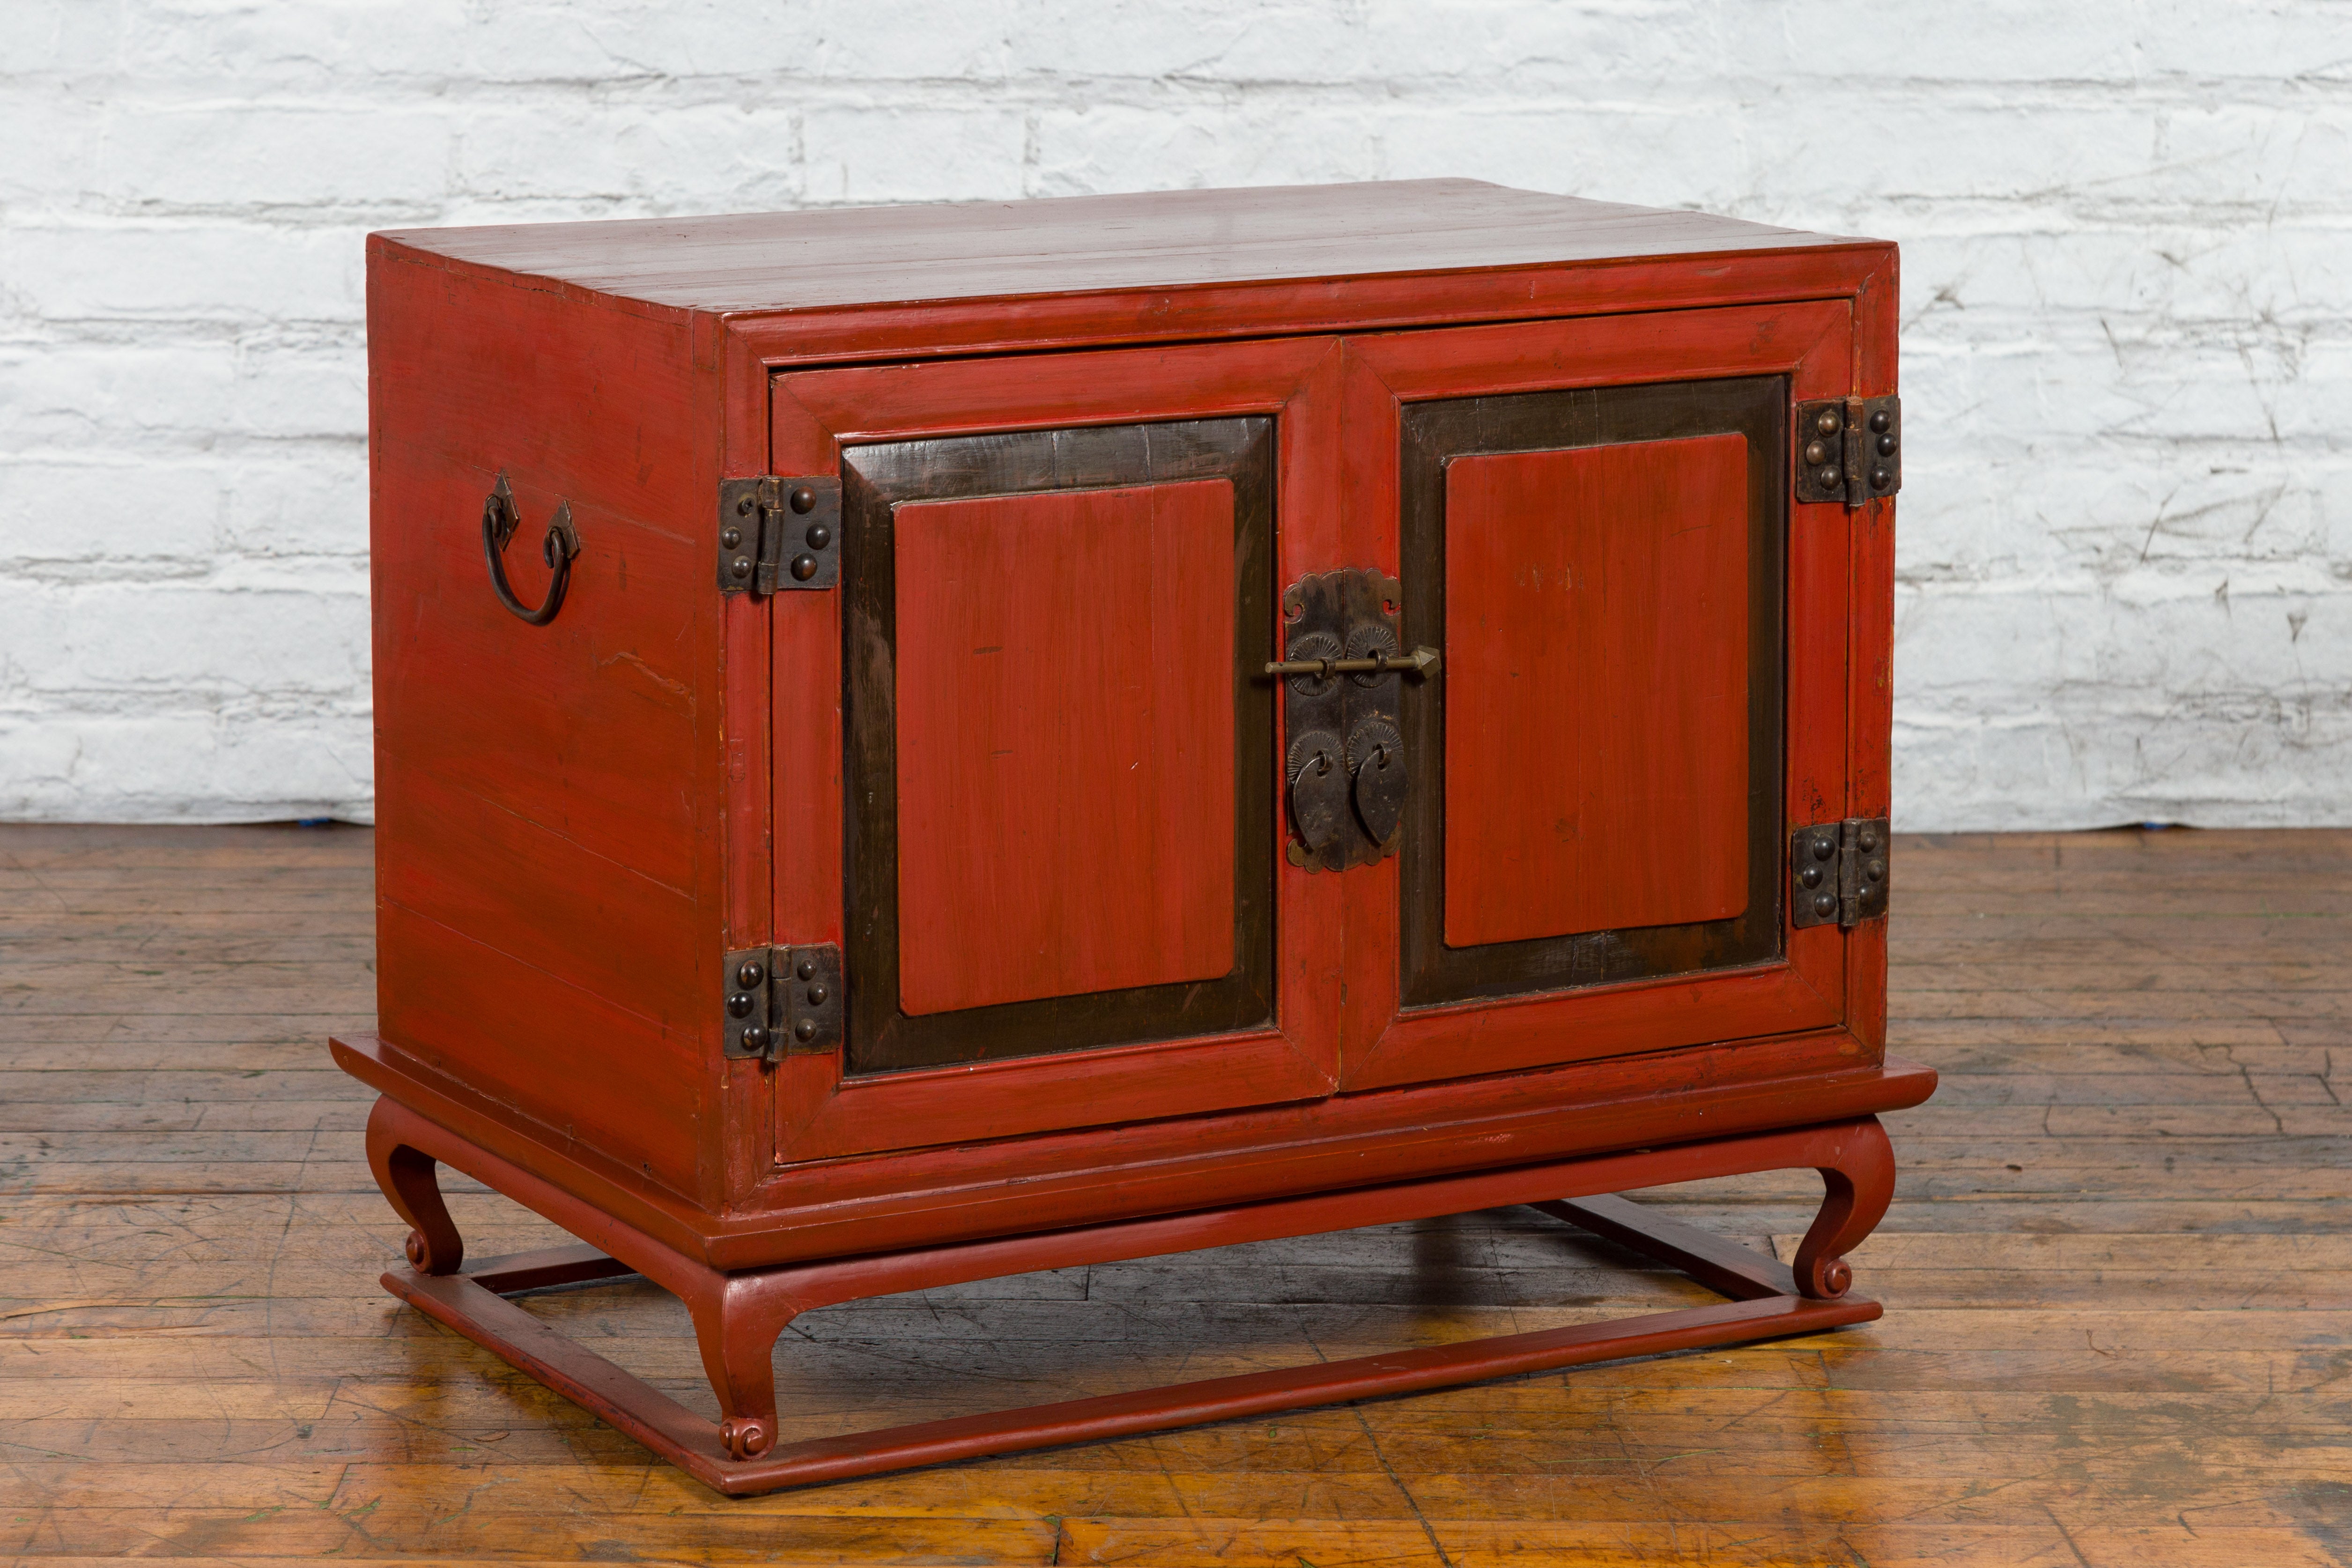 A vintage Chinese small cabinet from the mid 20th century with red lacquer, cabriole feet and brass hardware. Created in China during the Midcentury period, this small cabinet showcases a red lacquered finish complimenting the clean lines